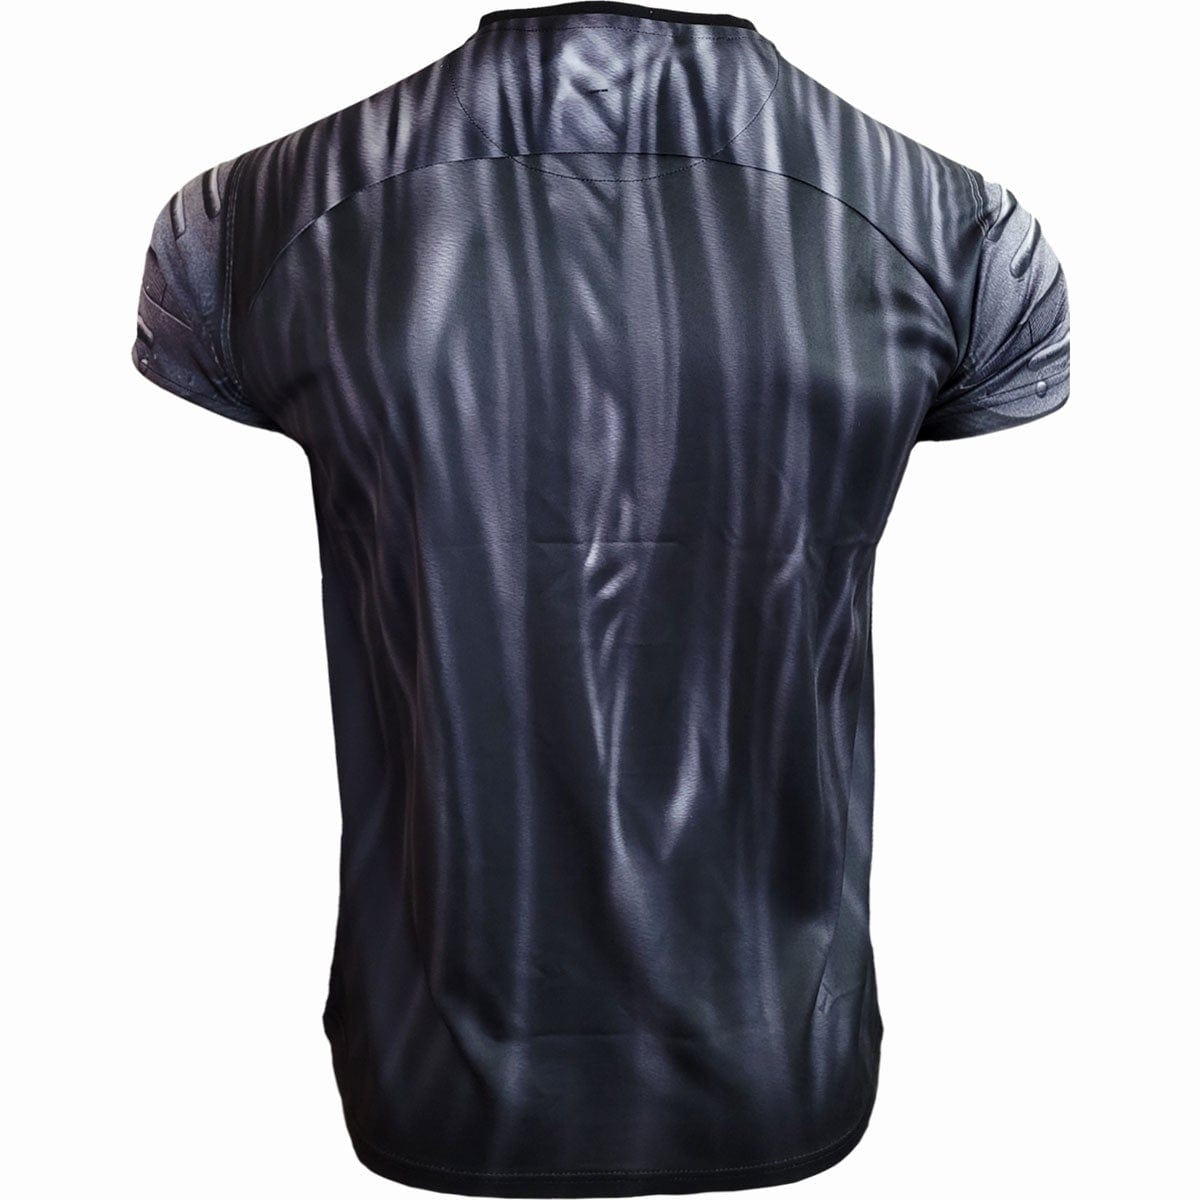 THE BATMAN - MUSCLE CAPE - Sustainable Football Shirts - Spiral USA